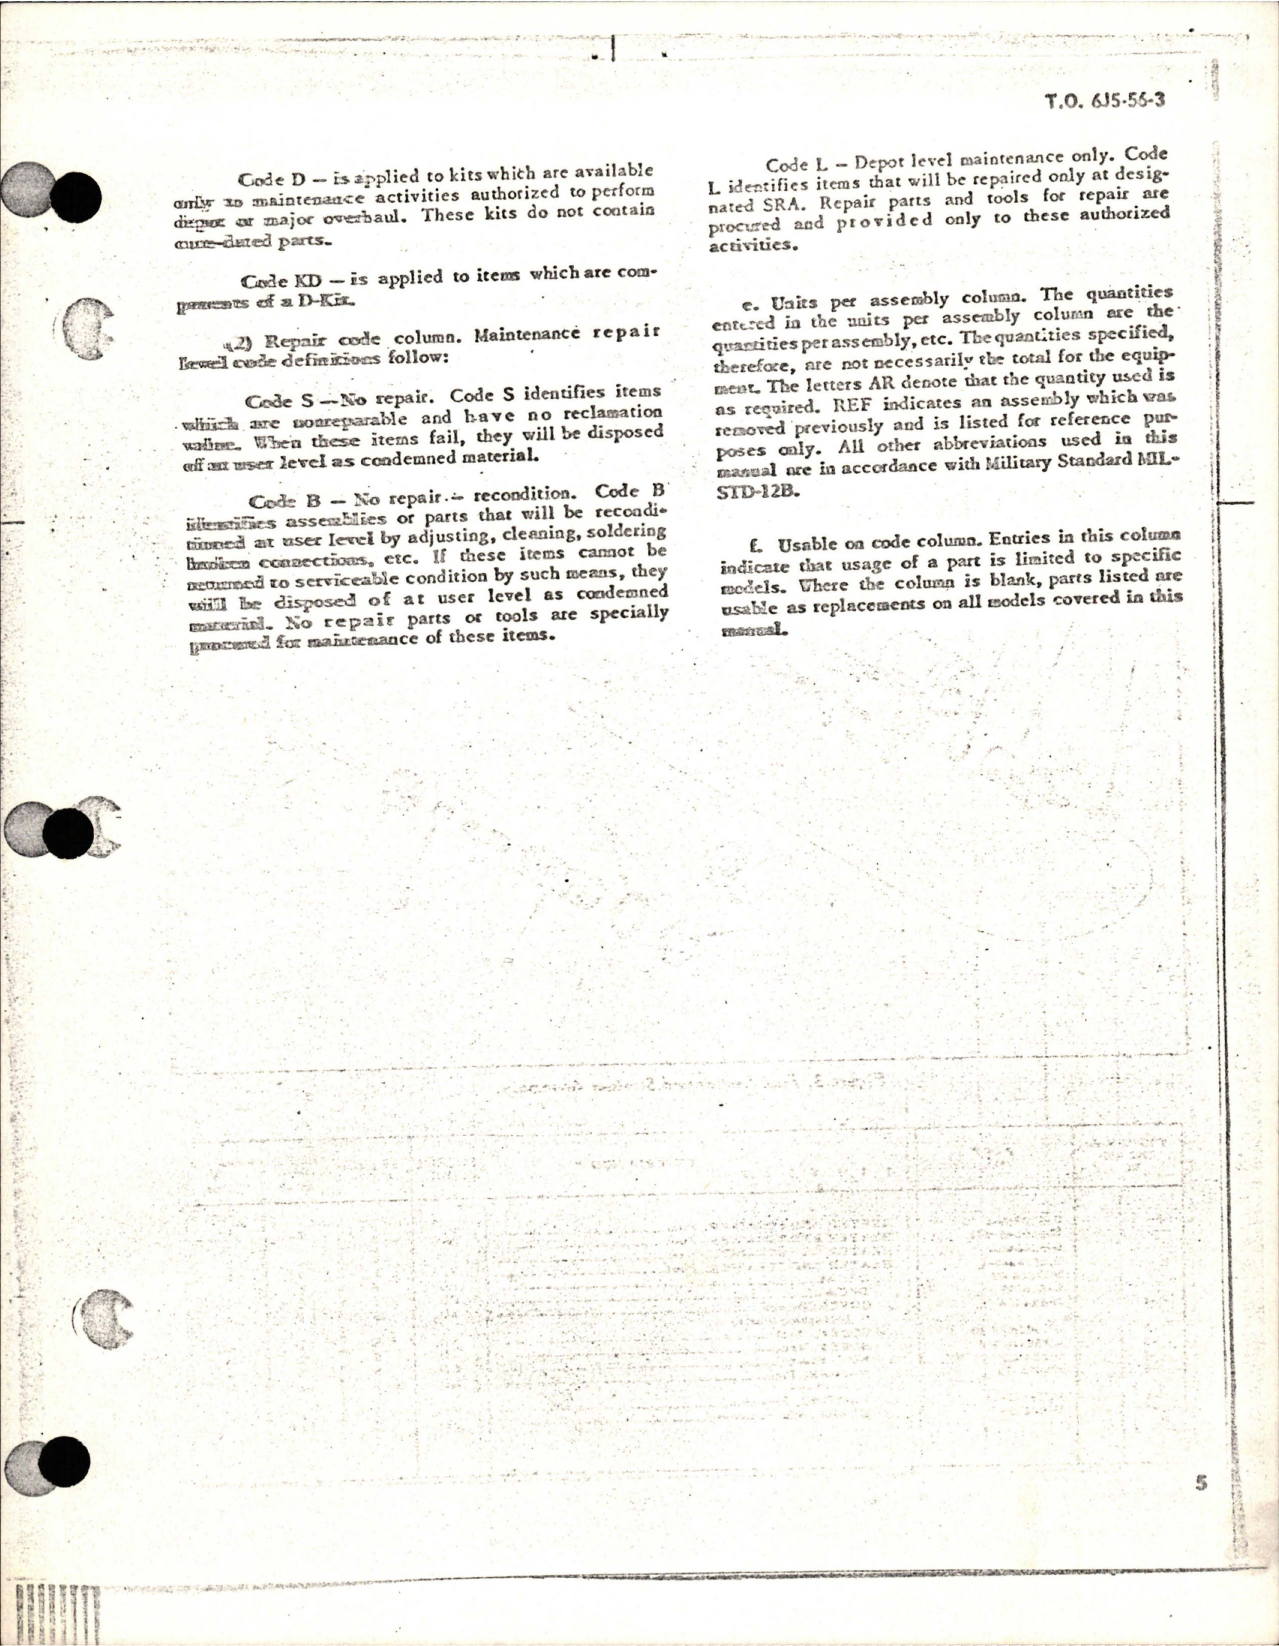 Sample page 5 from AirCorps Library document: Overhaul Instructions with Parts Breakdown for Fuel Heater and Strainer Assembly